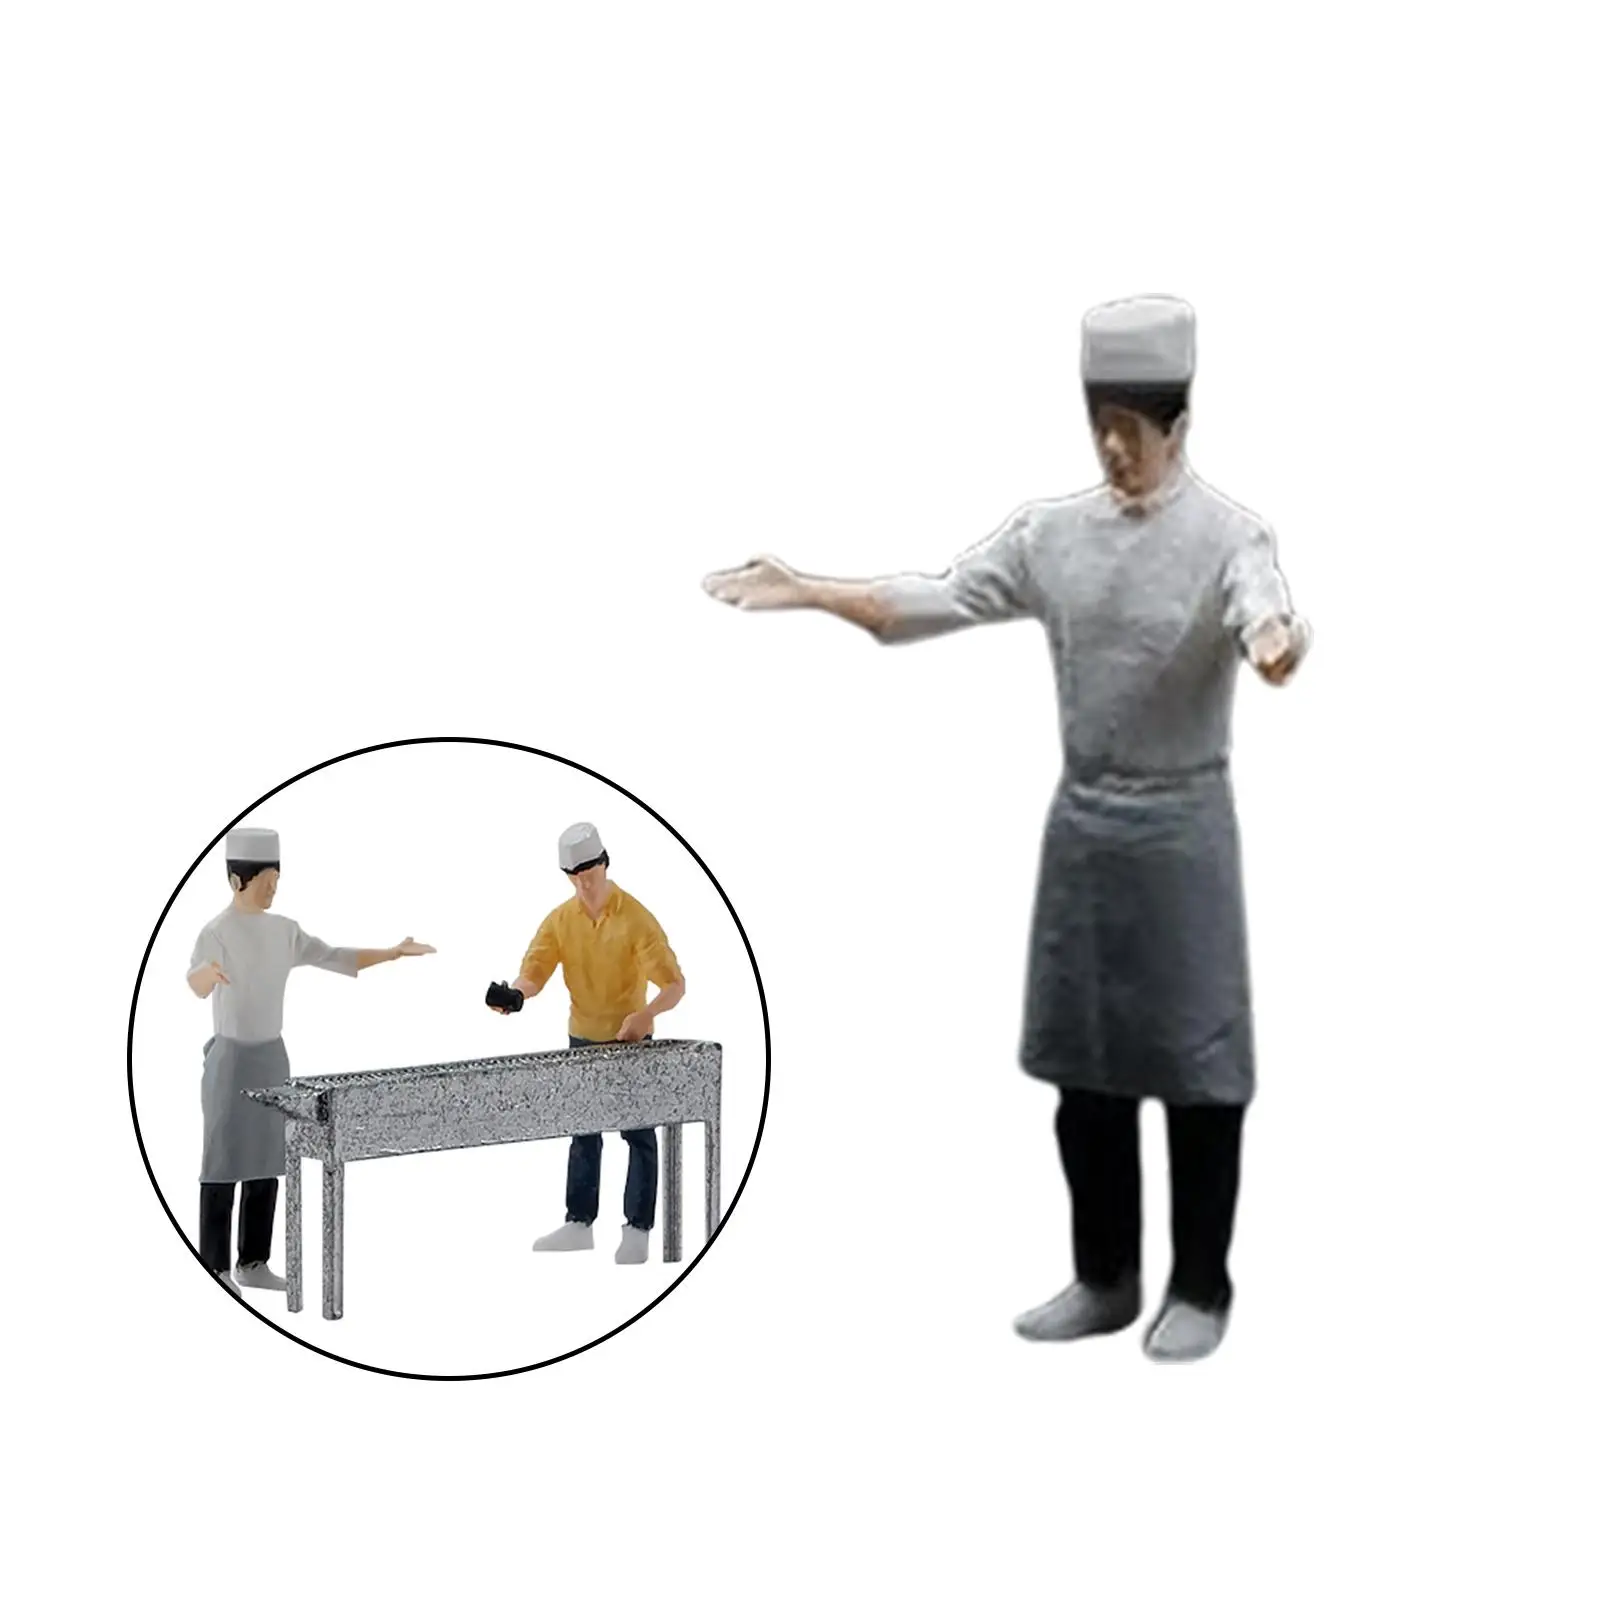 1/64 BBQ Chef Figures Diorama Scenery Train Railway Collections DIY Projects Decor